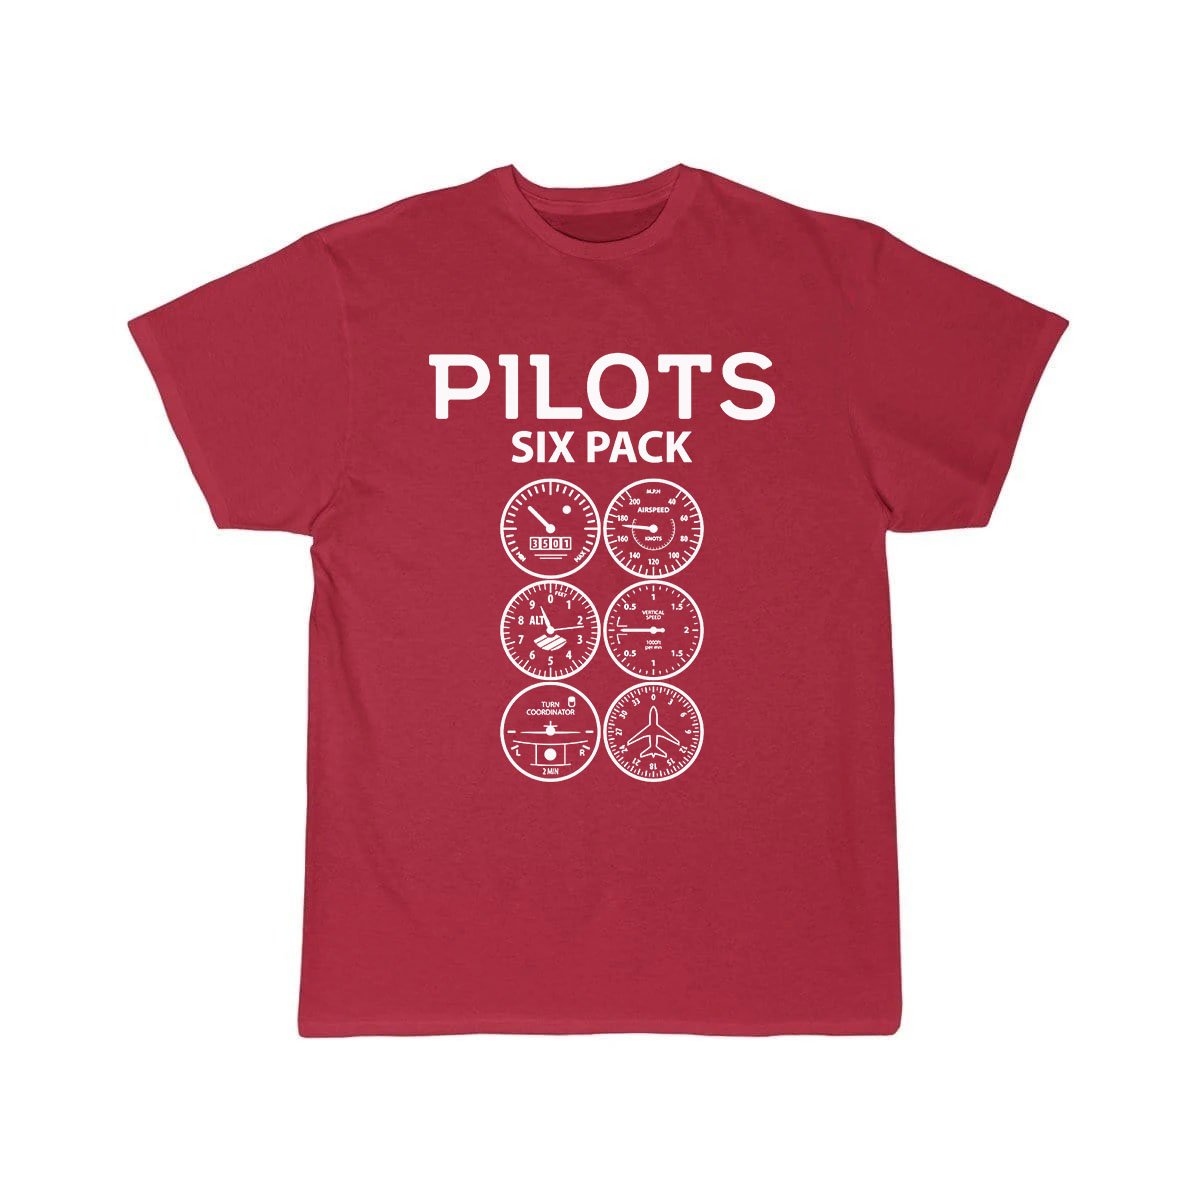 PILOTS SIXPACK - FUNNY AVIATION QUOTES GIFT CLASSIC T-SHIRT THE AV8R